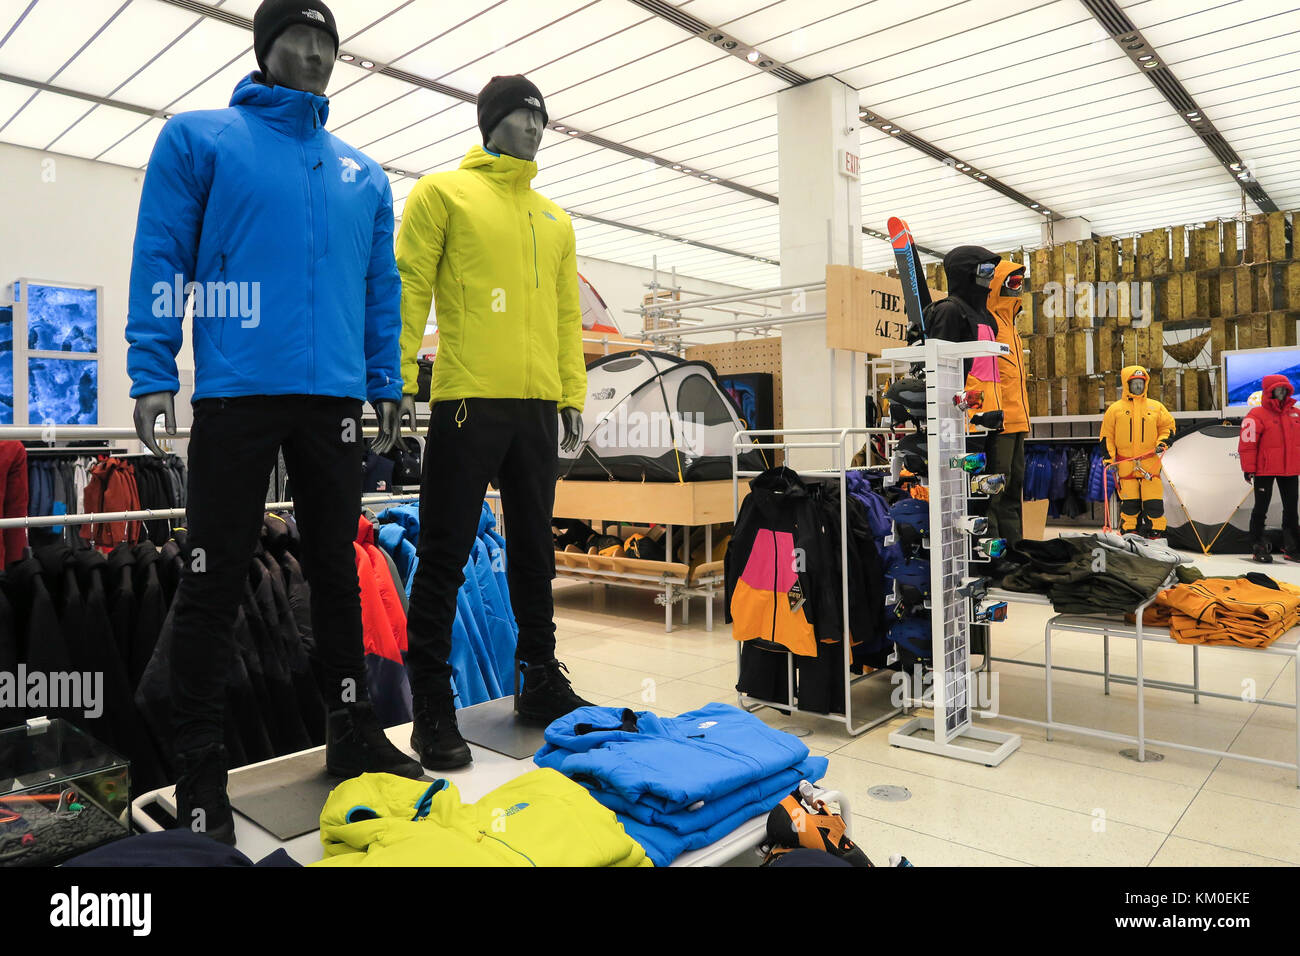 North Face Clothing High Resolution Stock Photography and Images - Alamy